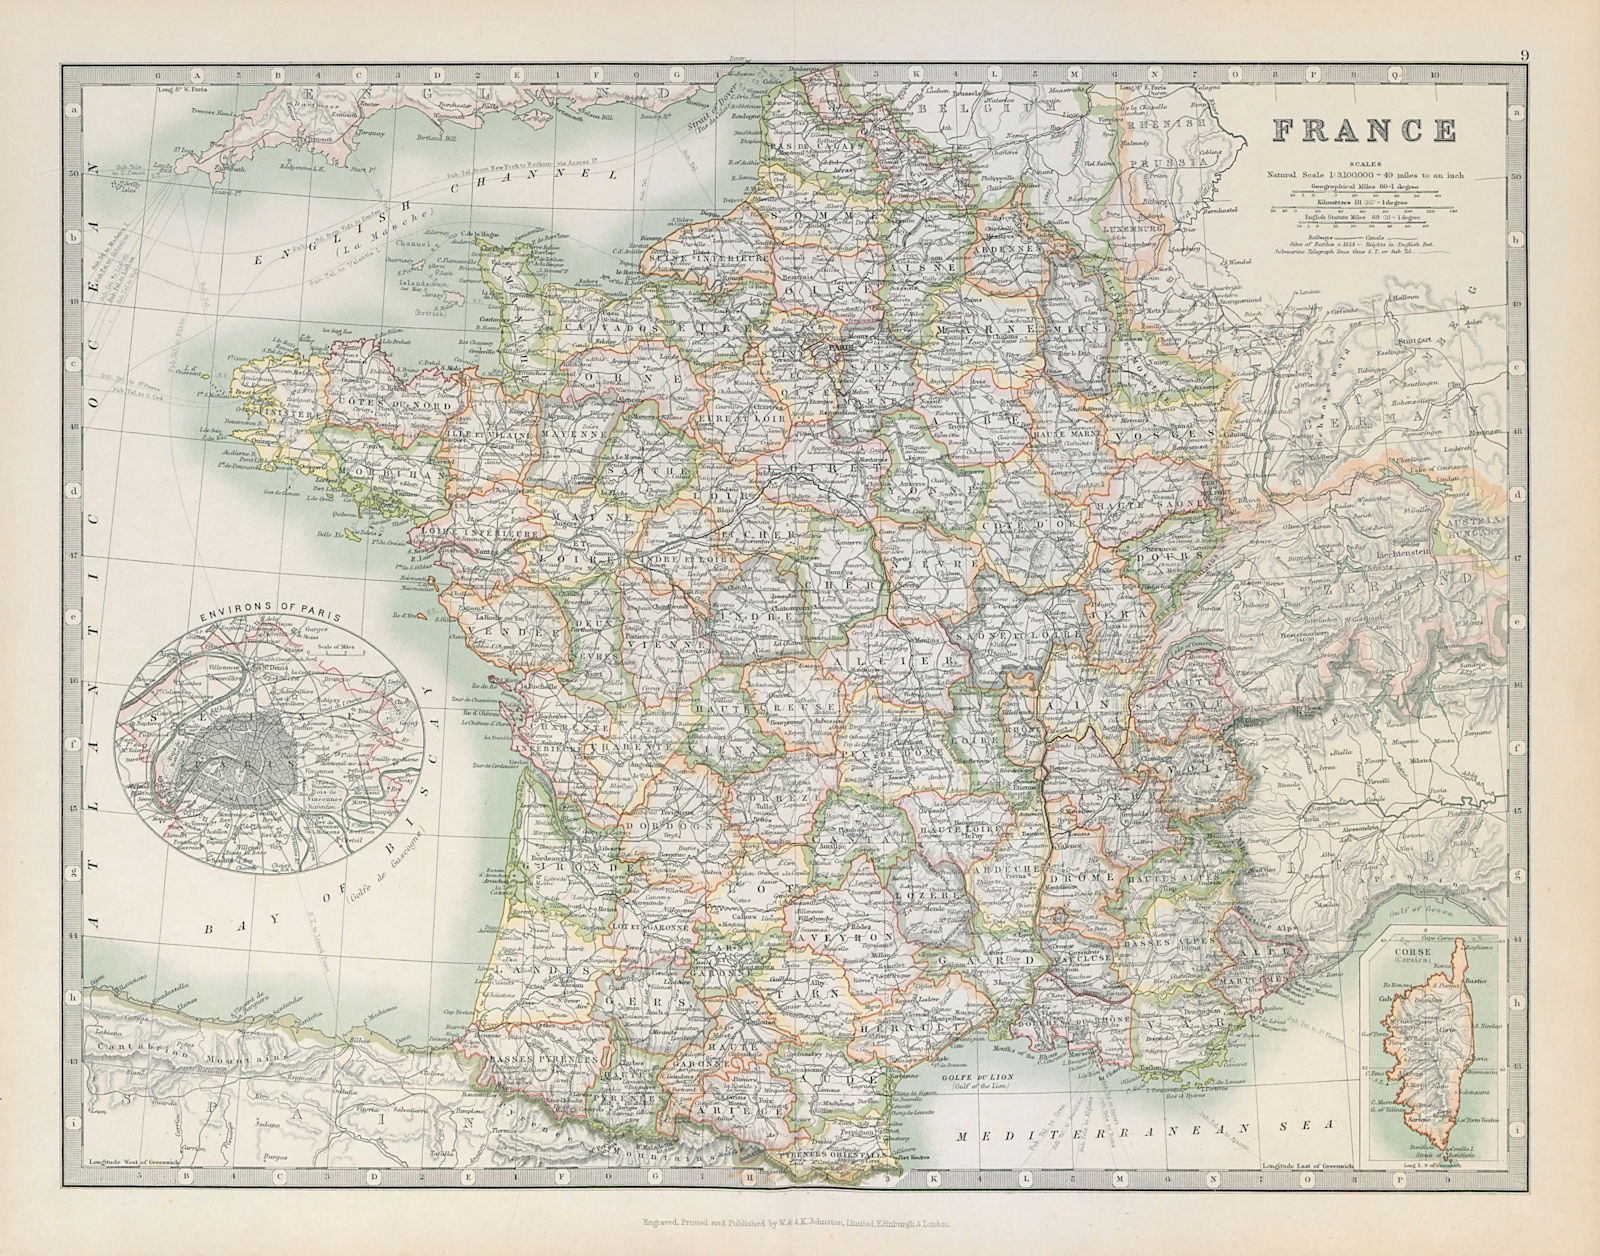 Associate Product FRANCE showing important battlefields and dates. JOHNSTON 1915 old antique map